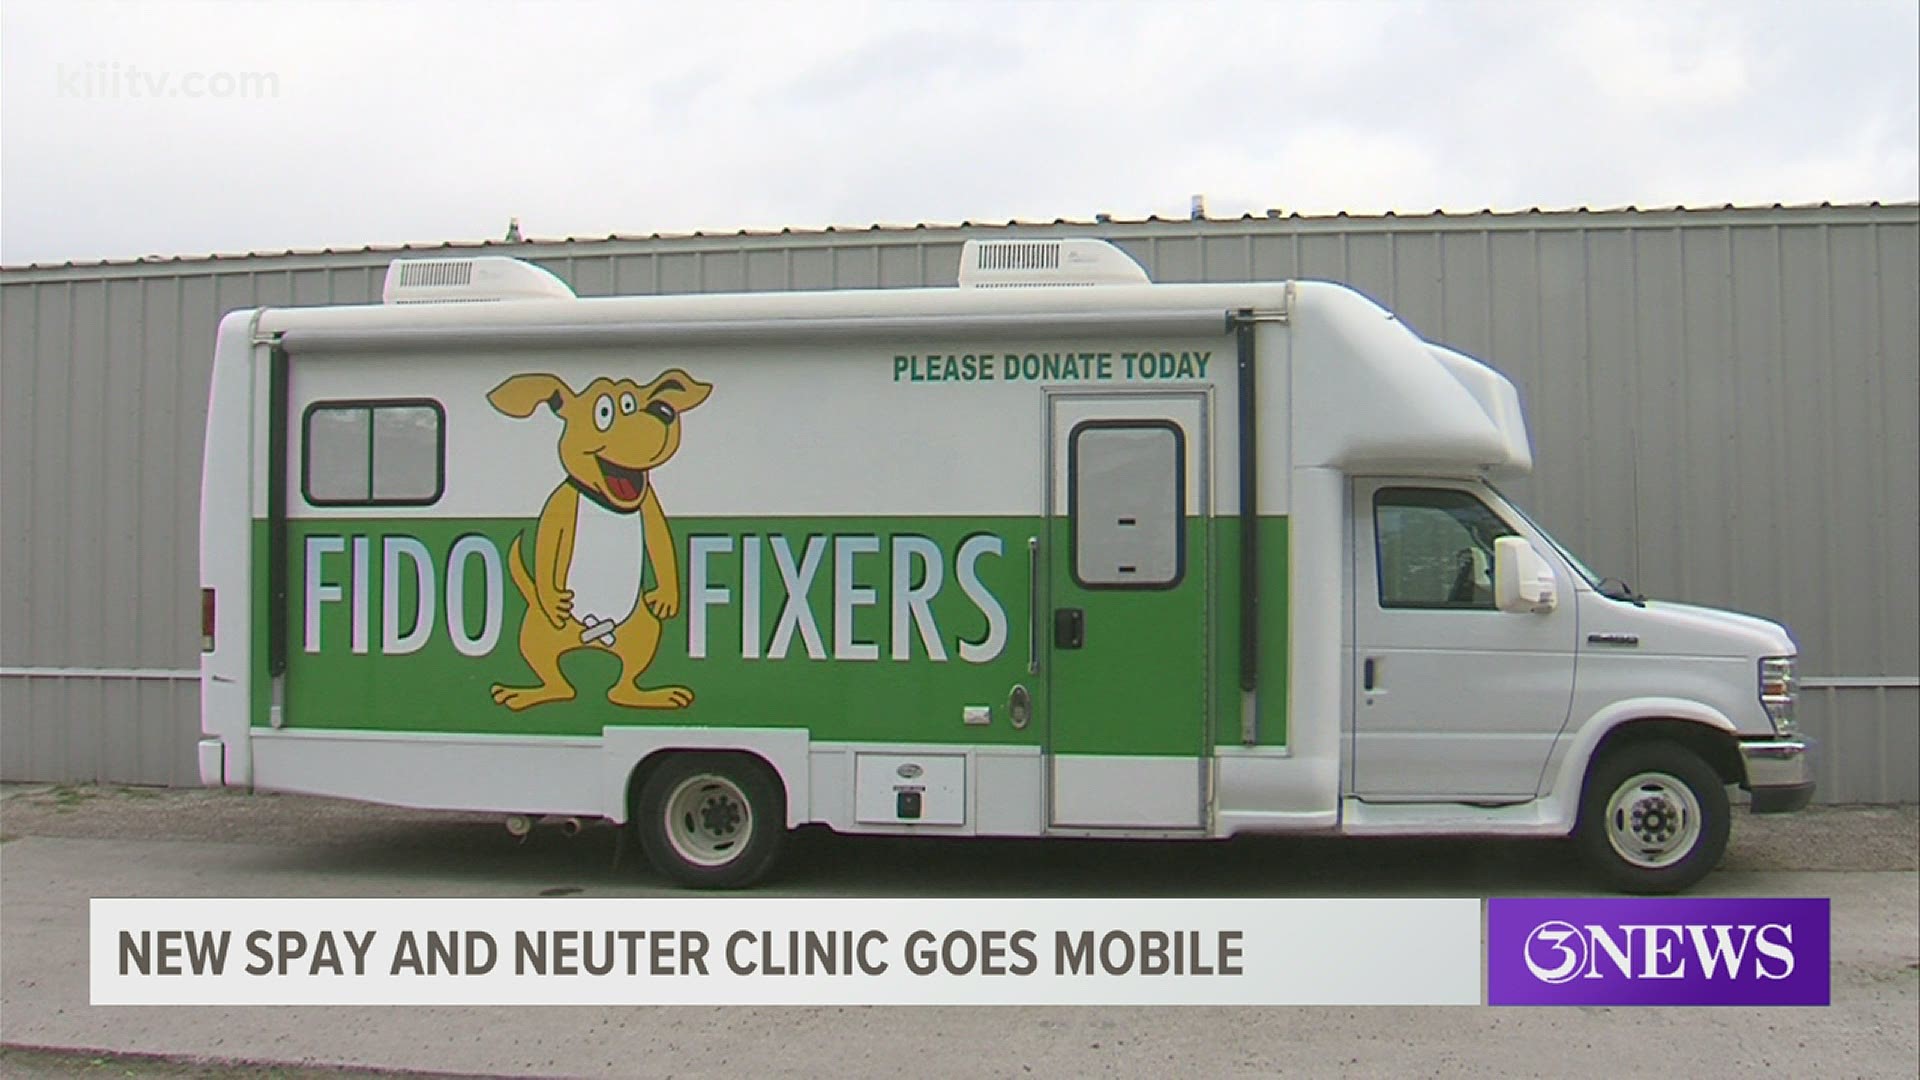 The organization provides either no or low cost spay and neuter services in economically marginalized areas.